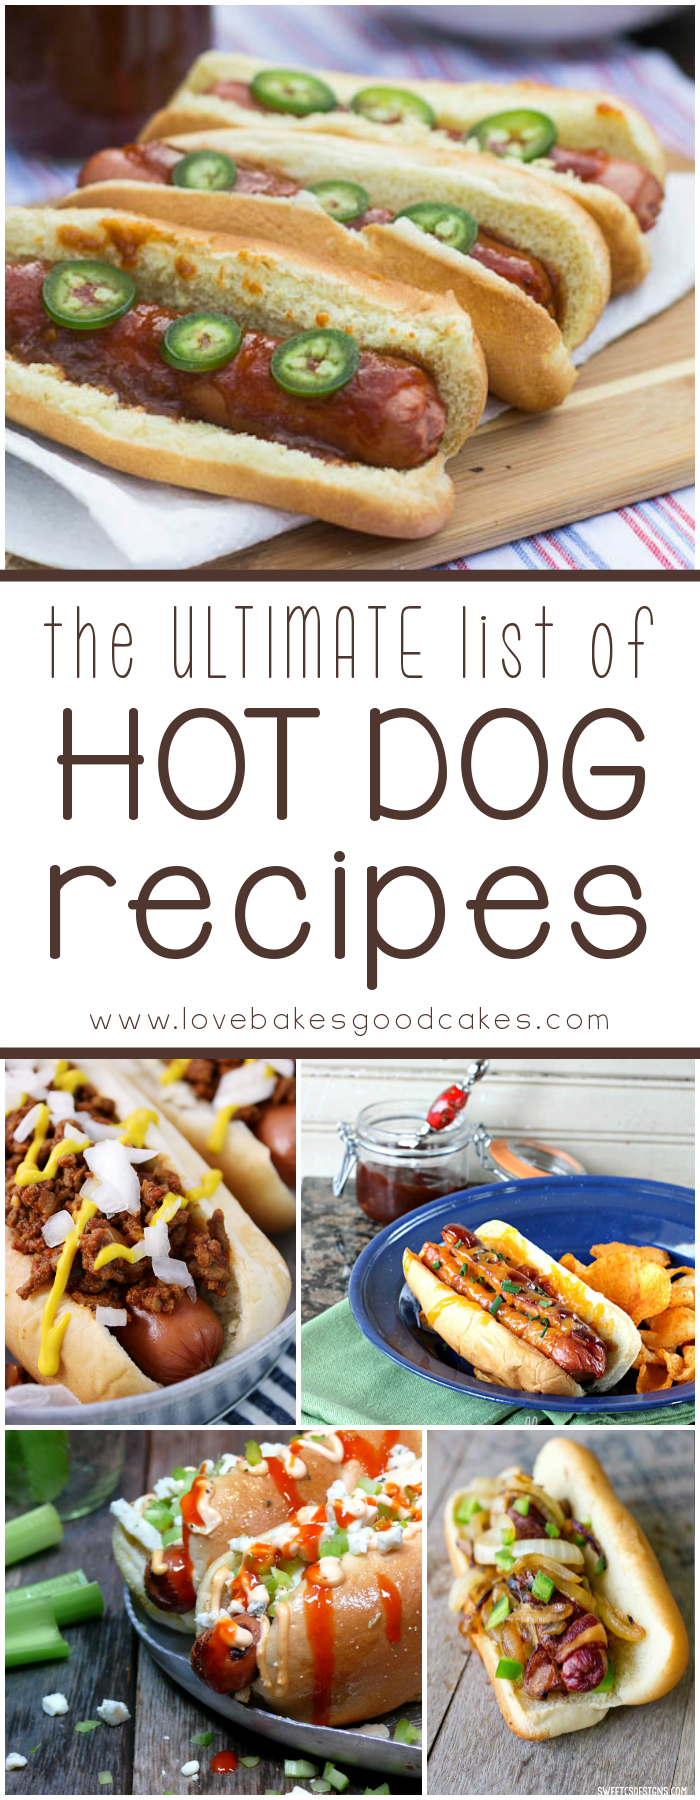 The ULTIMATE List of Hot Dog Recipes collage.